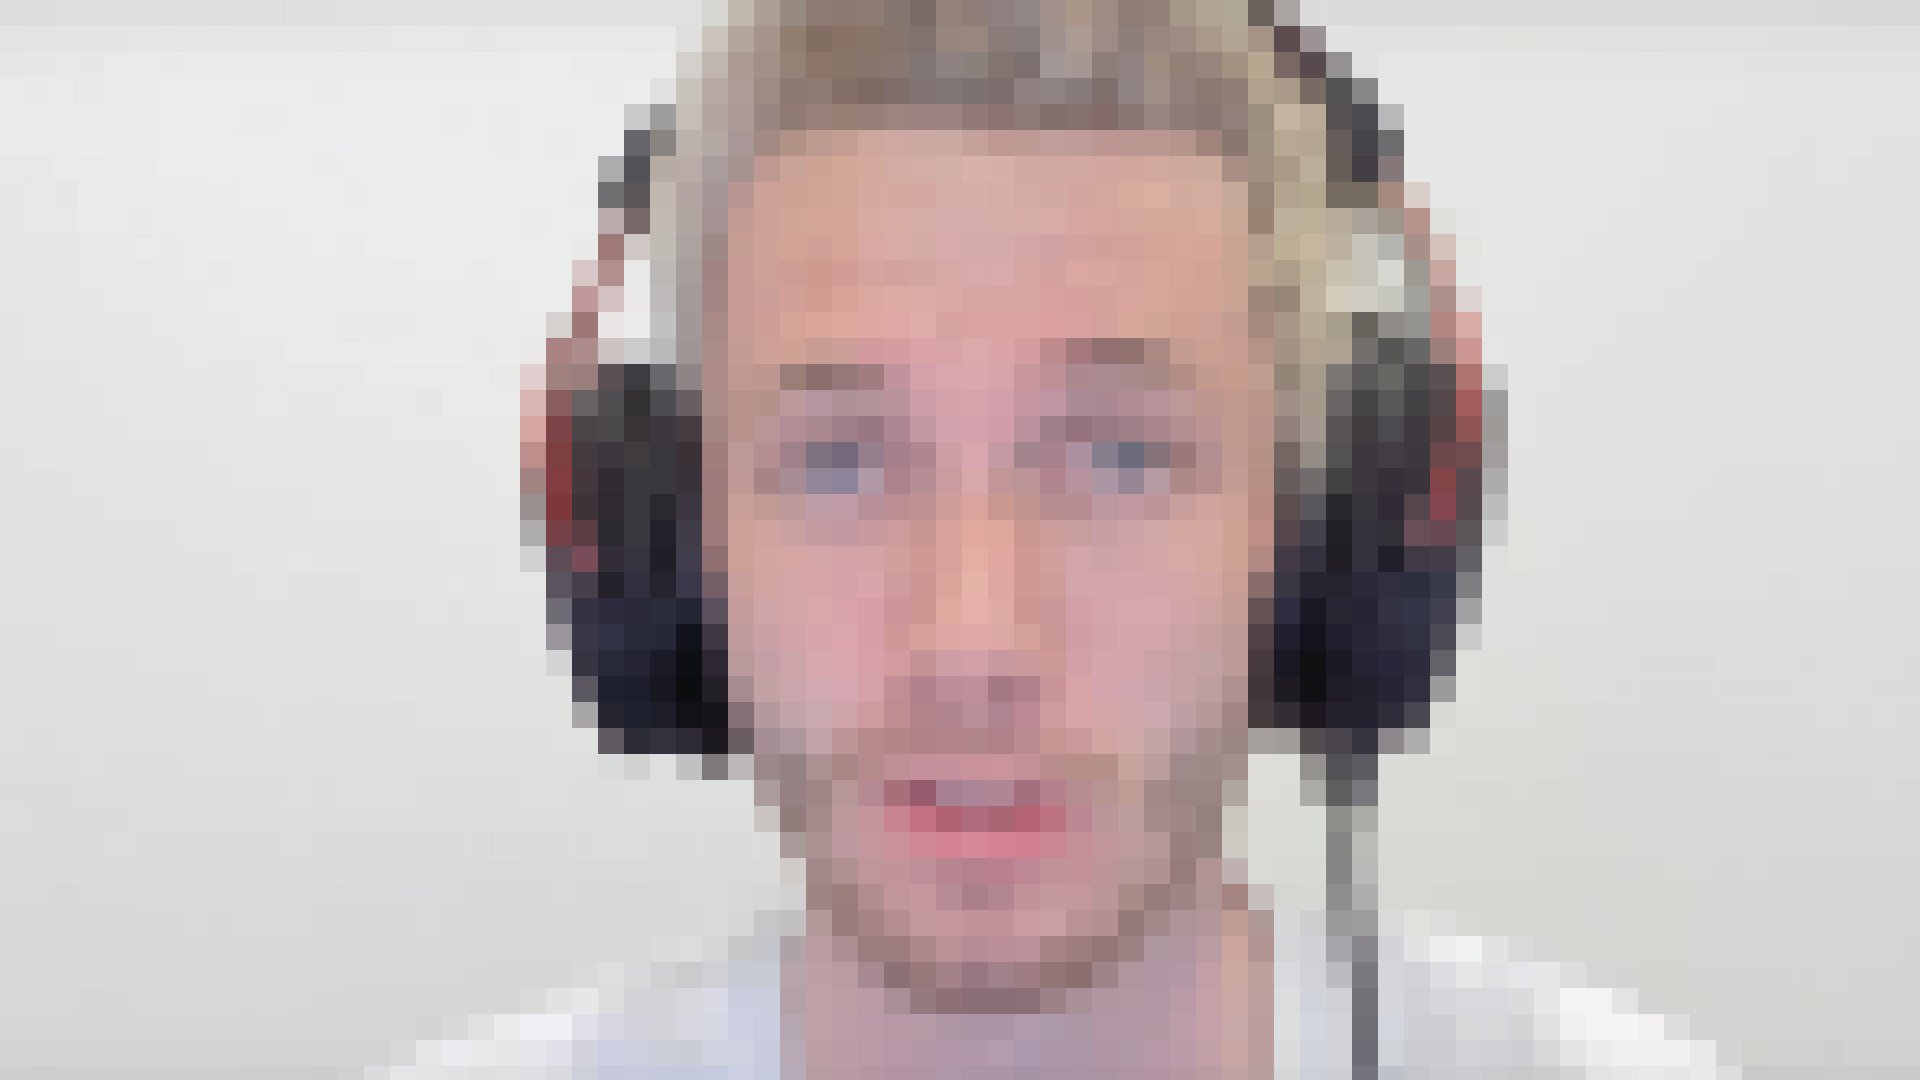 A pixelated image of a YouTube gamer